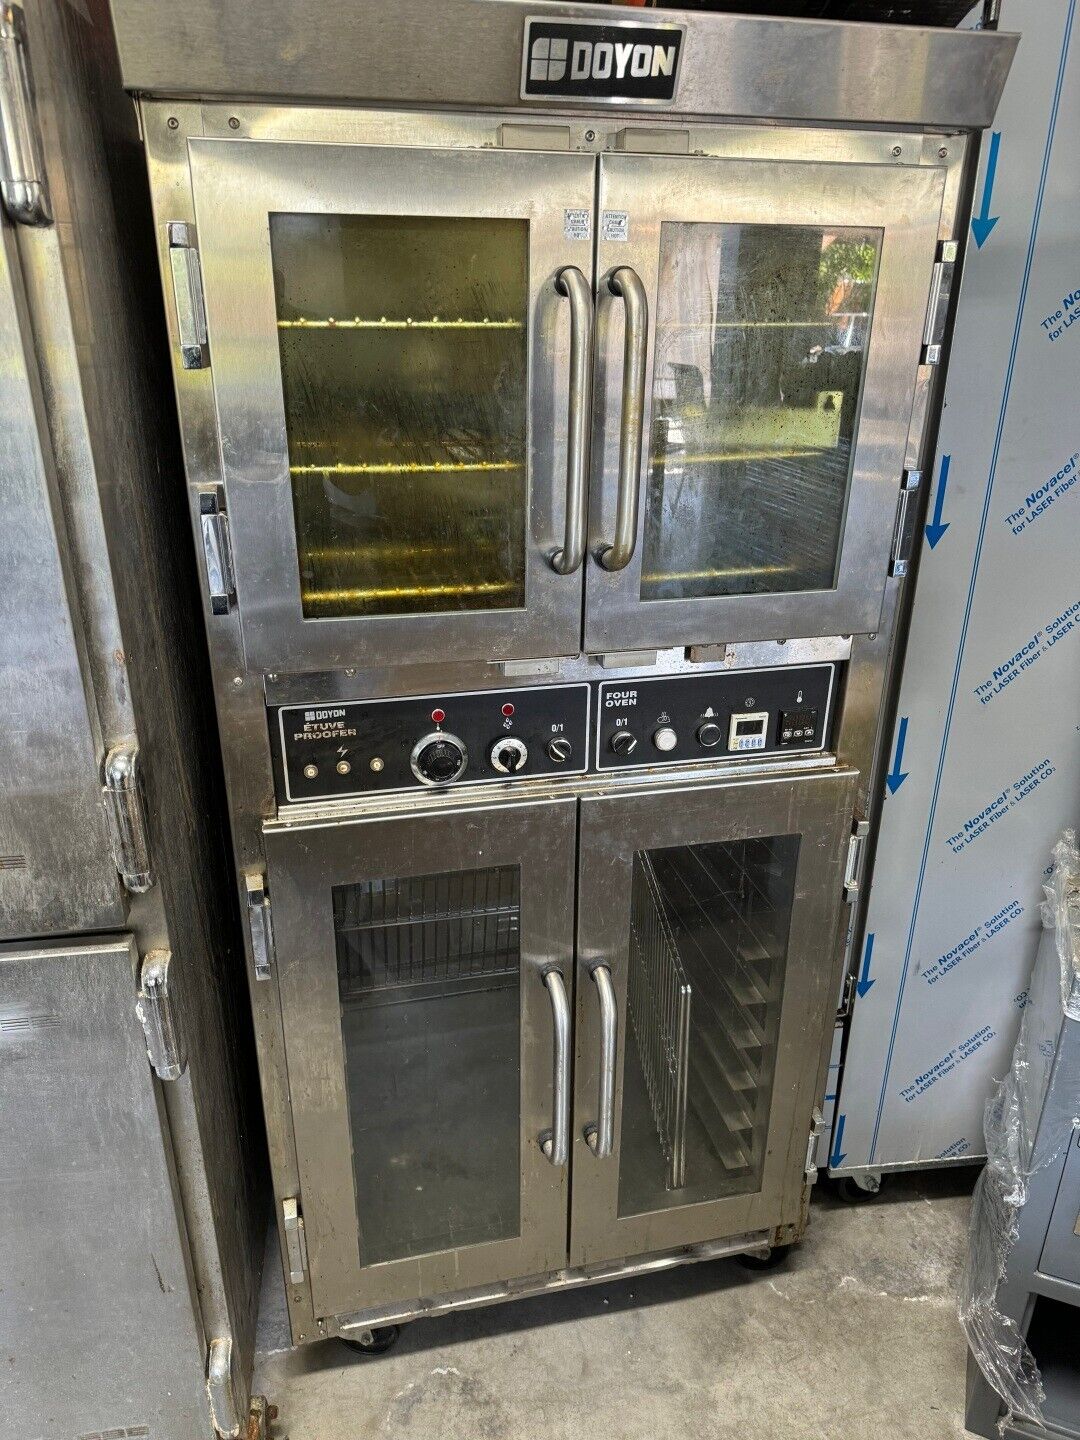 DOYON JAOP3 Electric Proofer Combo Baking Convention Oven 2018 barely used